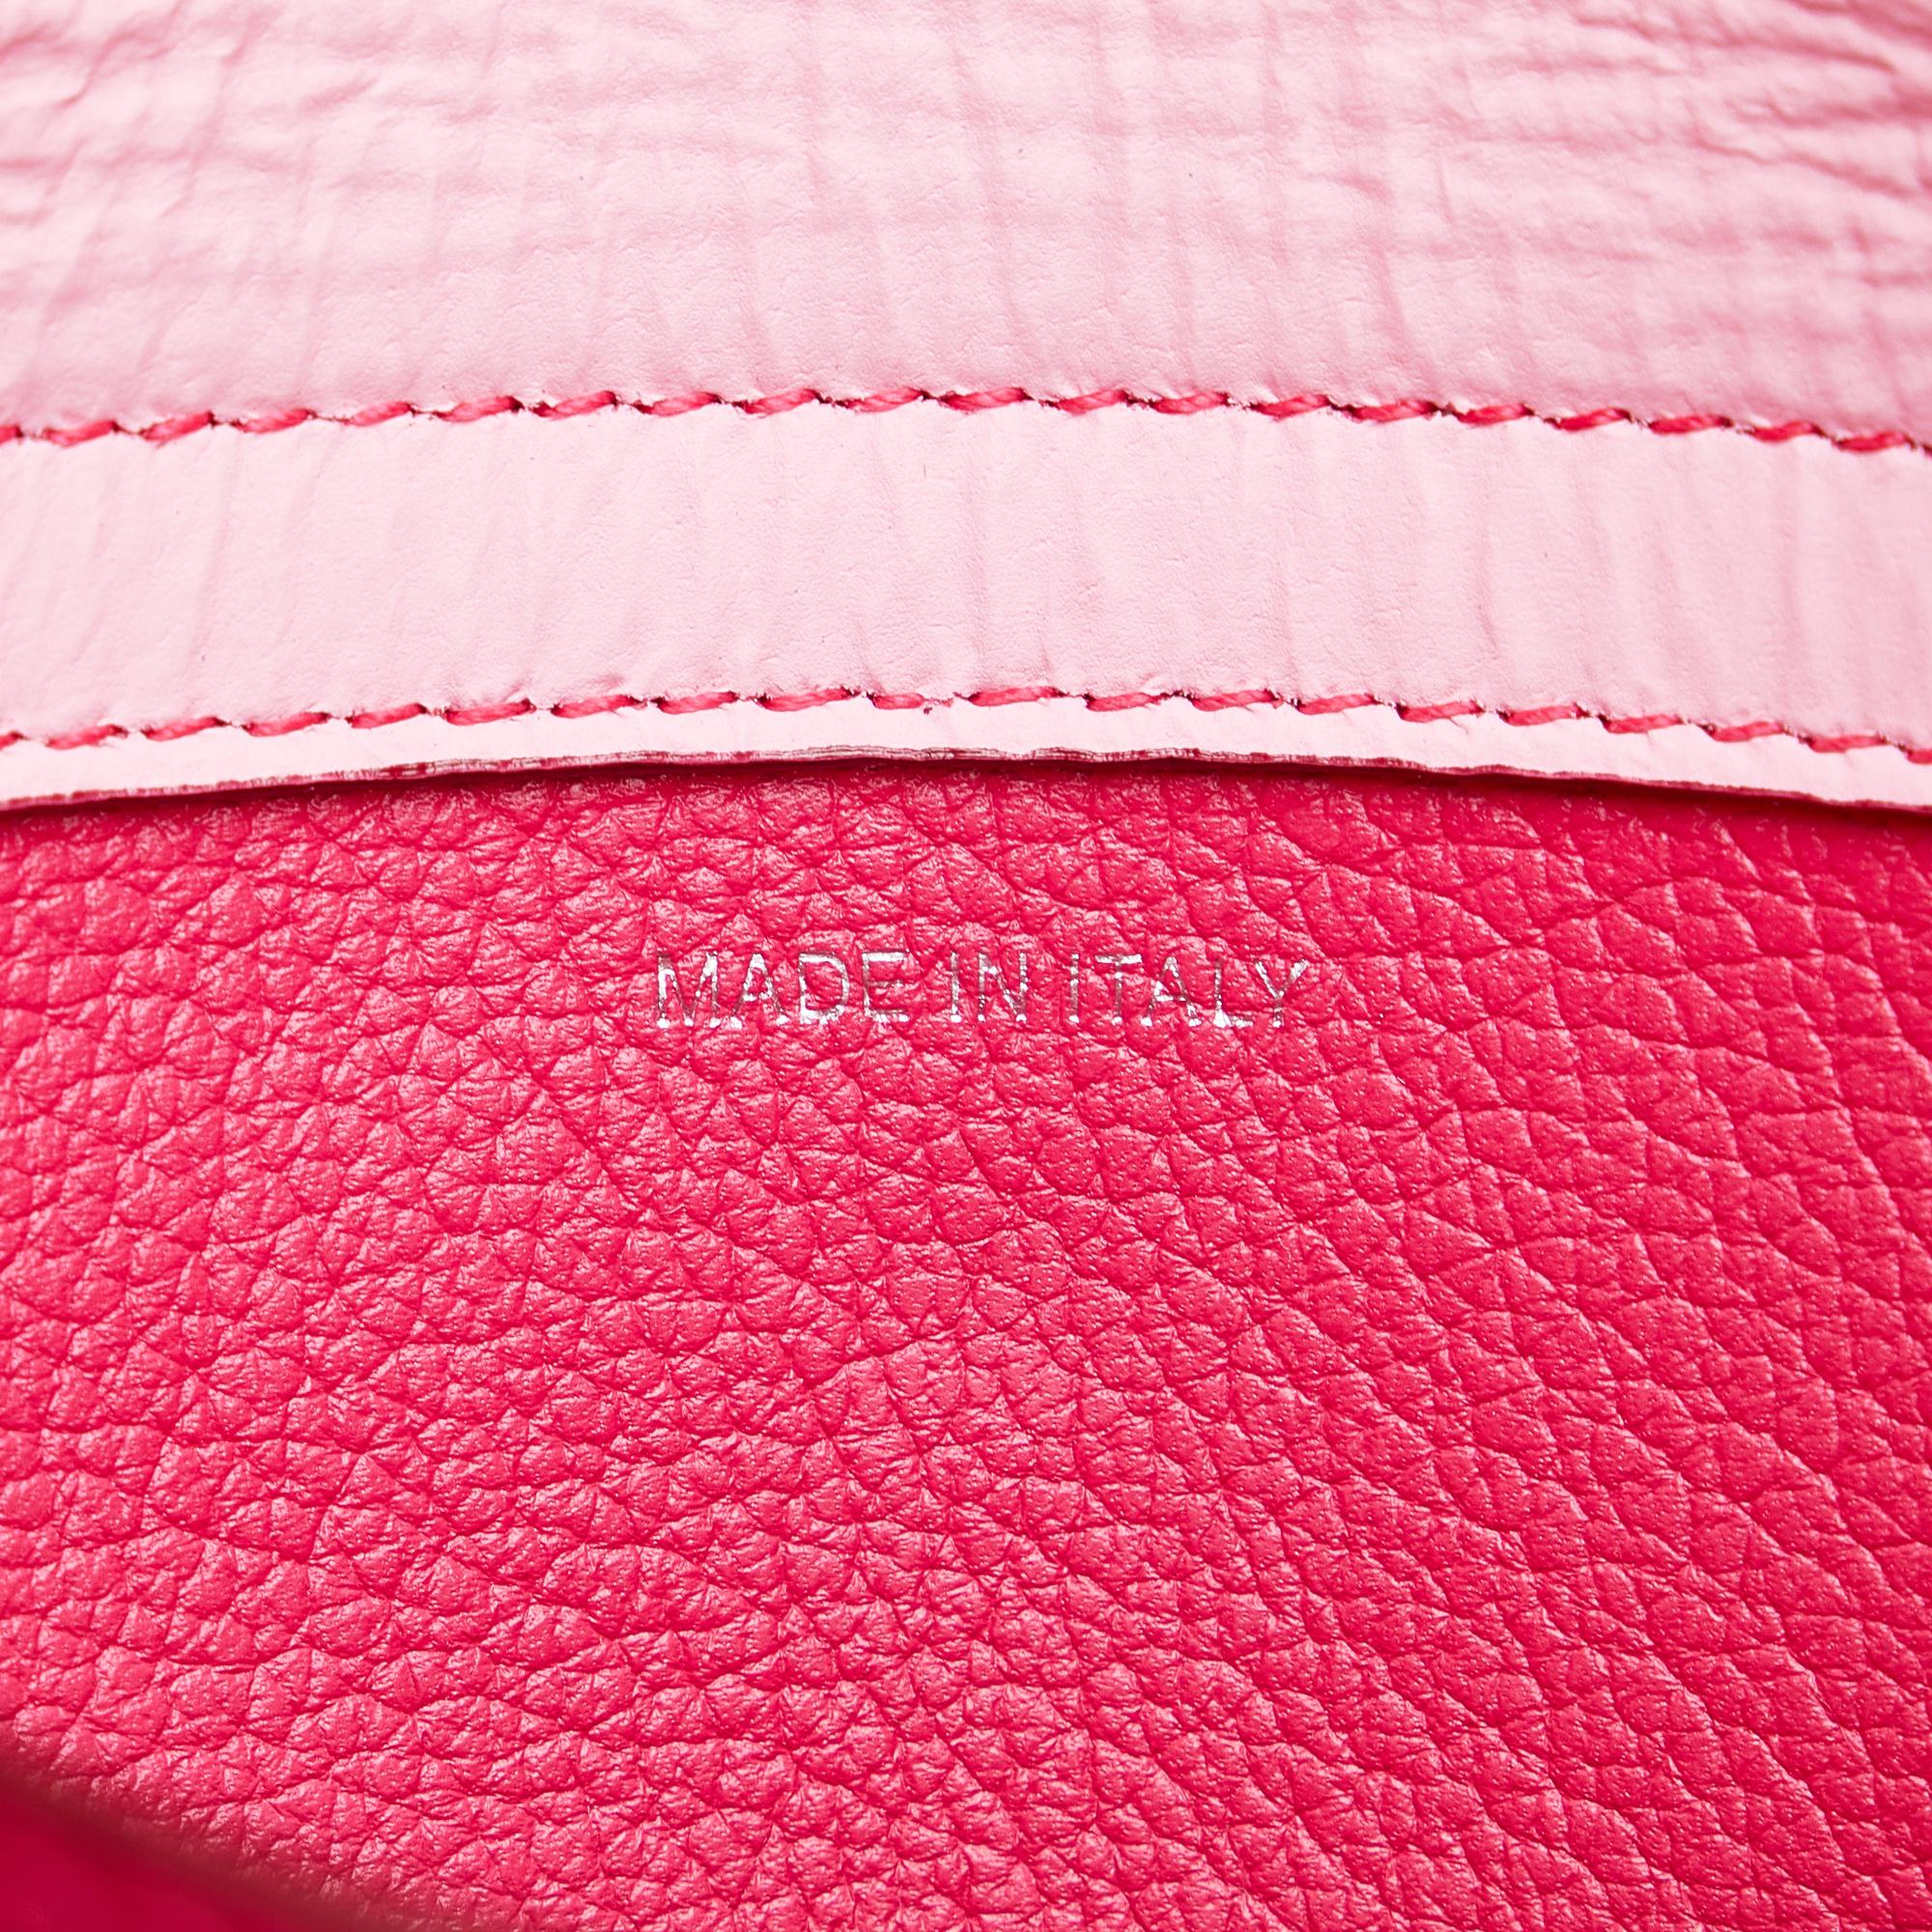 Dior Pink Perforated Cannage Dioriva Tote